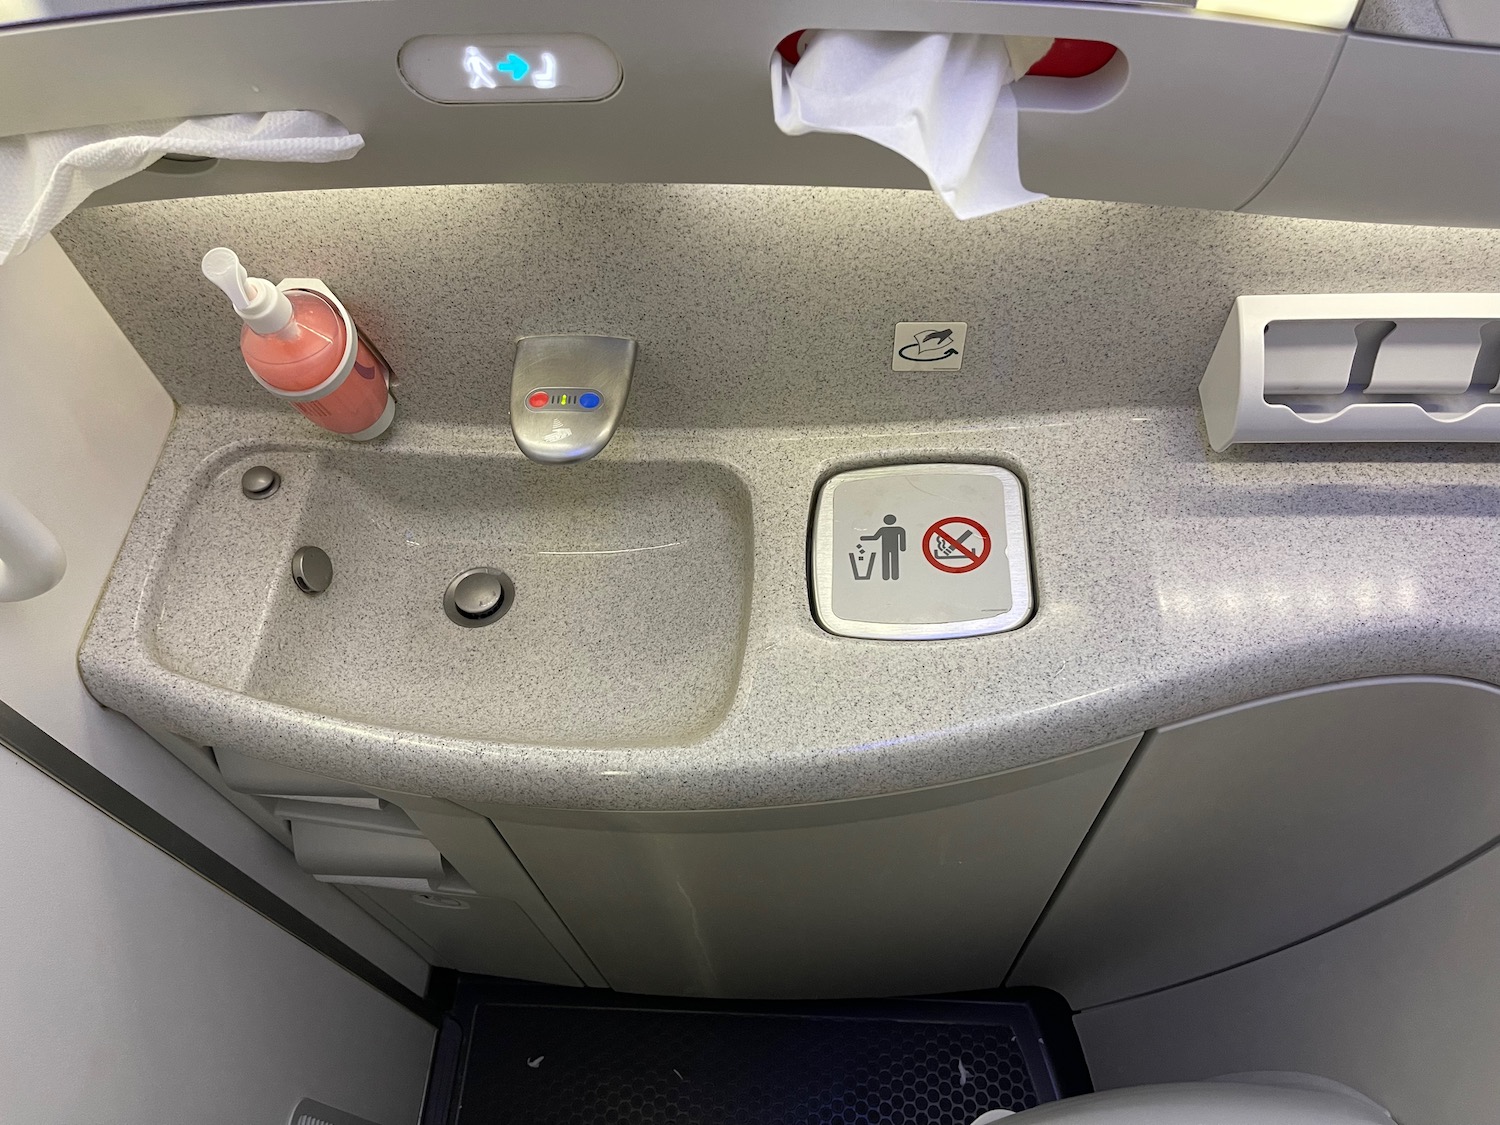 a sink and a seat in an airplane